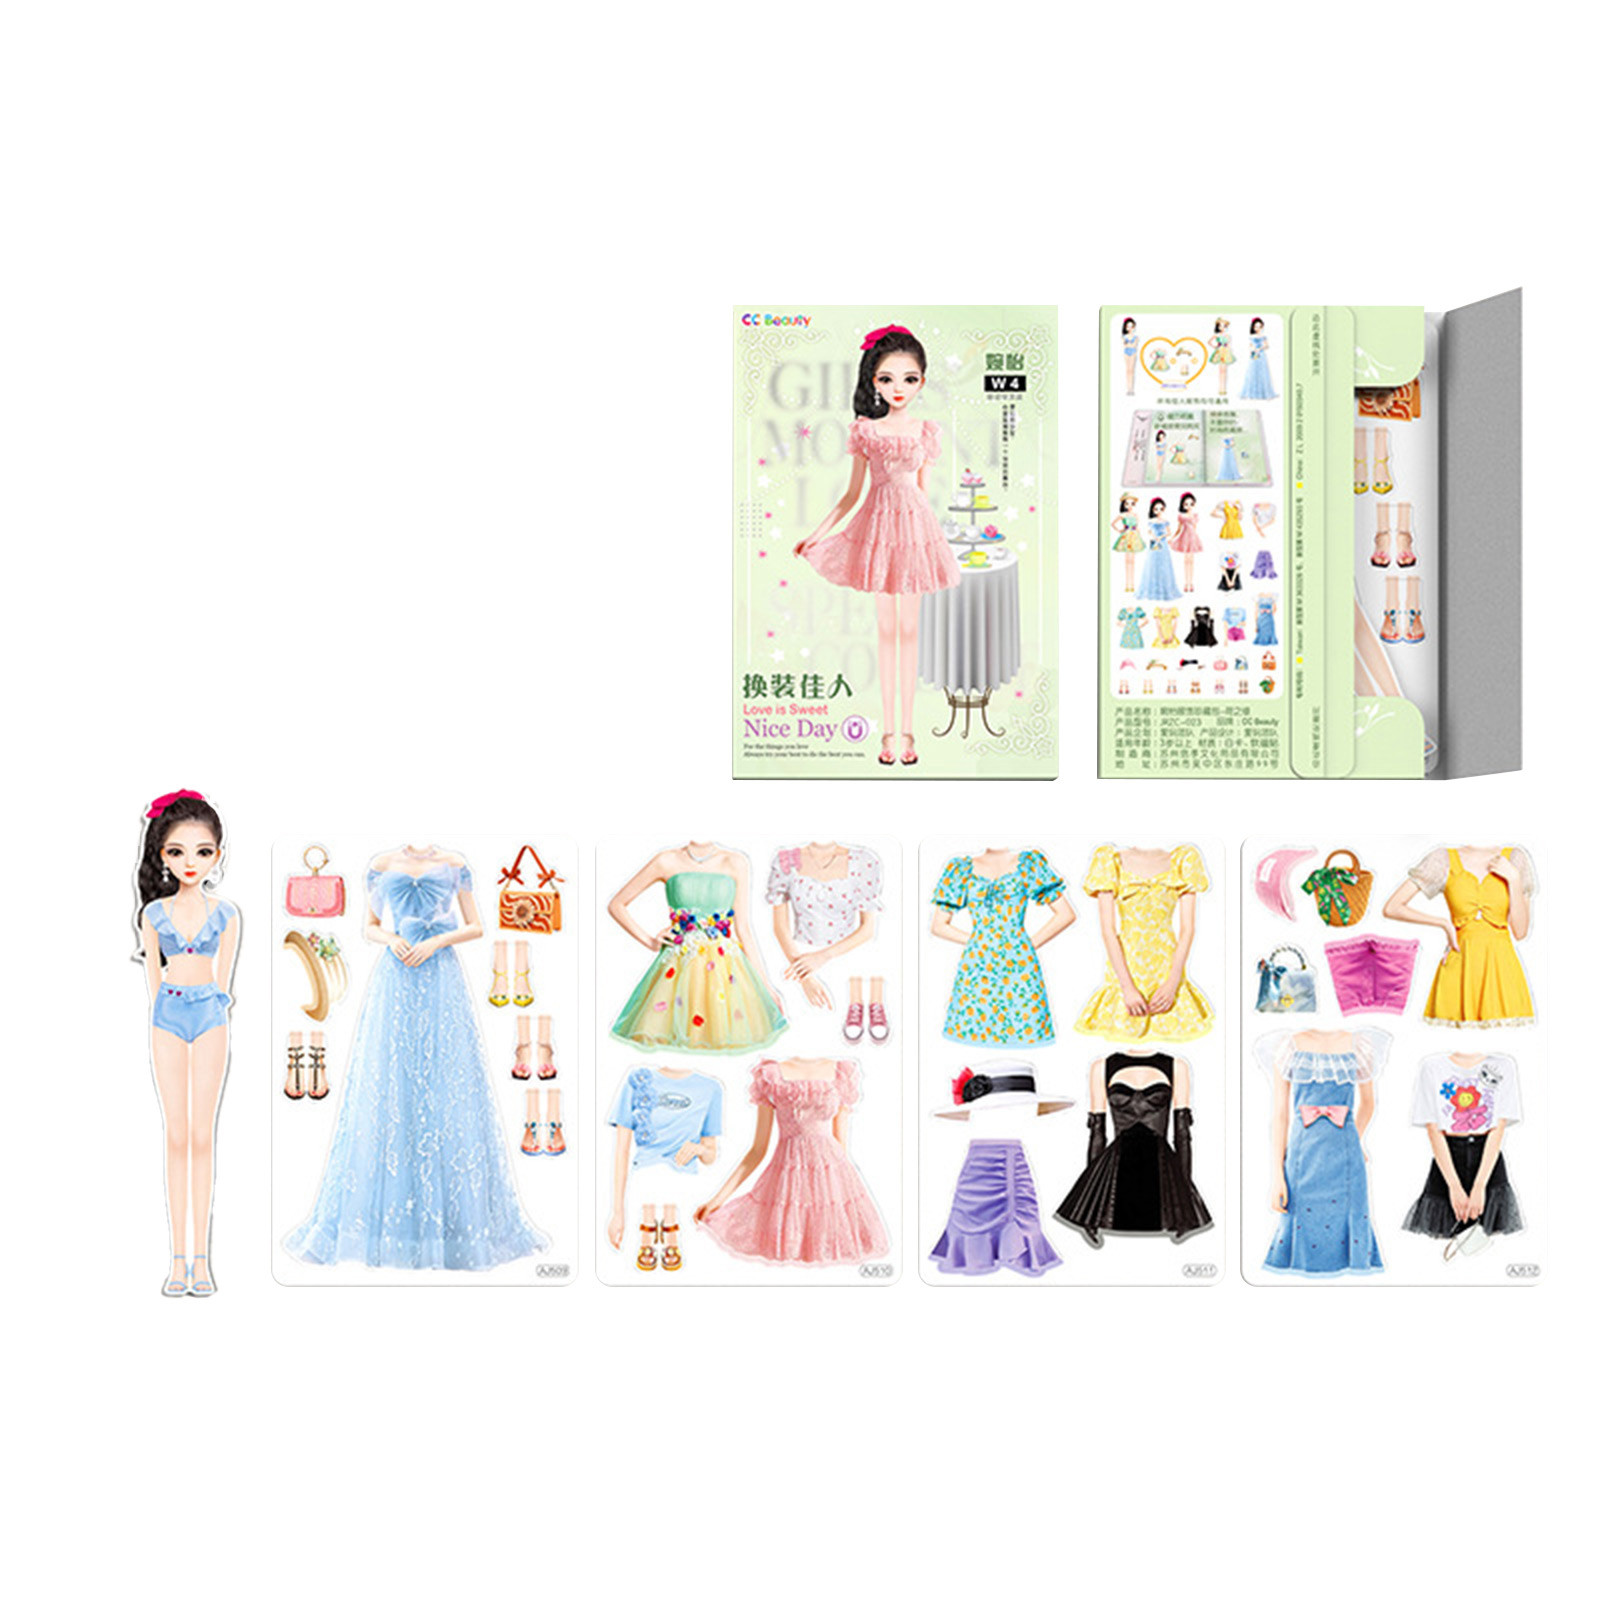 Loyerfyivos Magnetic Princess Dress Up Paper Doll Pretend Play Game, Travel Toys Car Road Trip,Magnet Clothes Puzzles for Kids Toddler Girls,Preschool Learning Created Imagine Set Birthday Gift - image 1 of 5